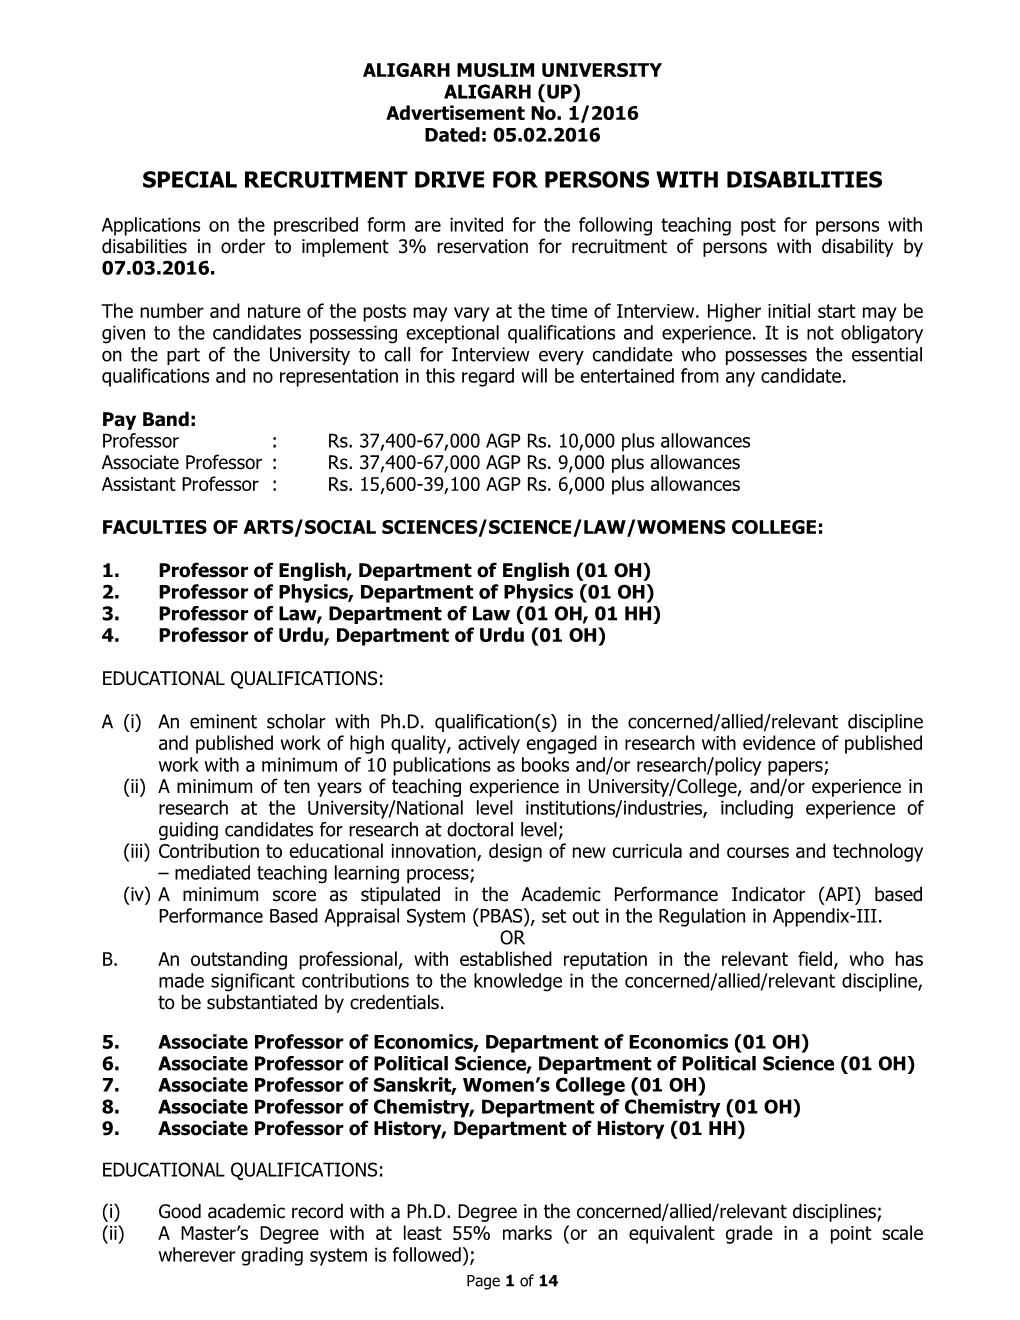 Special Recruitment Drive for Persons with Disabilities